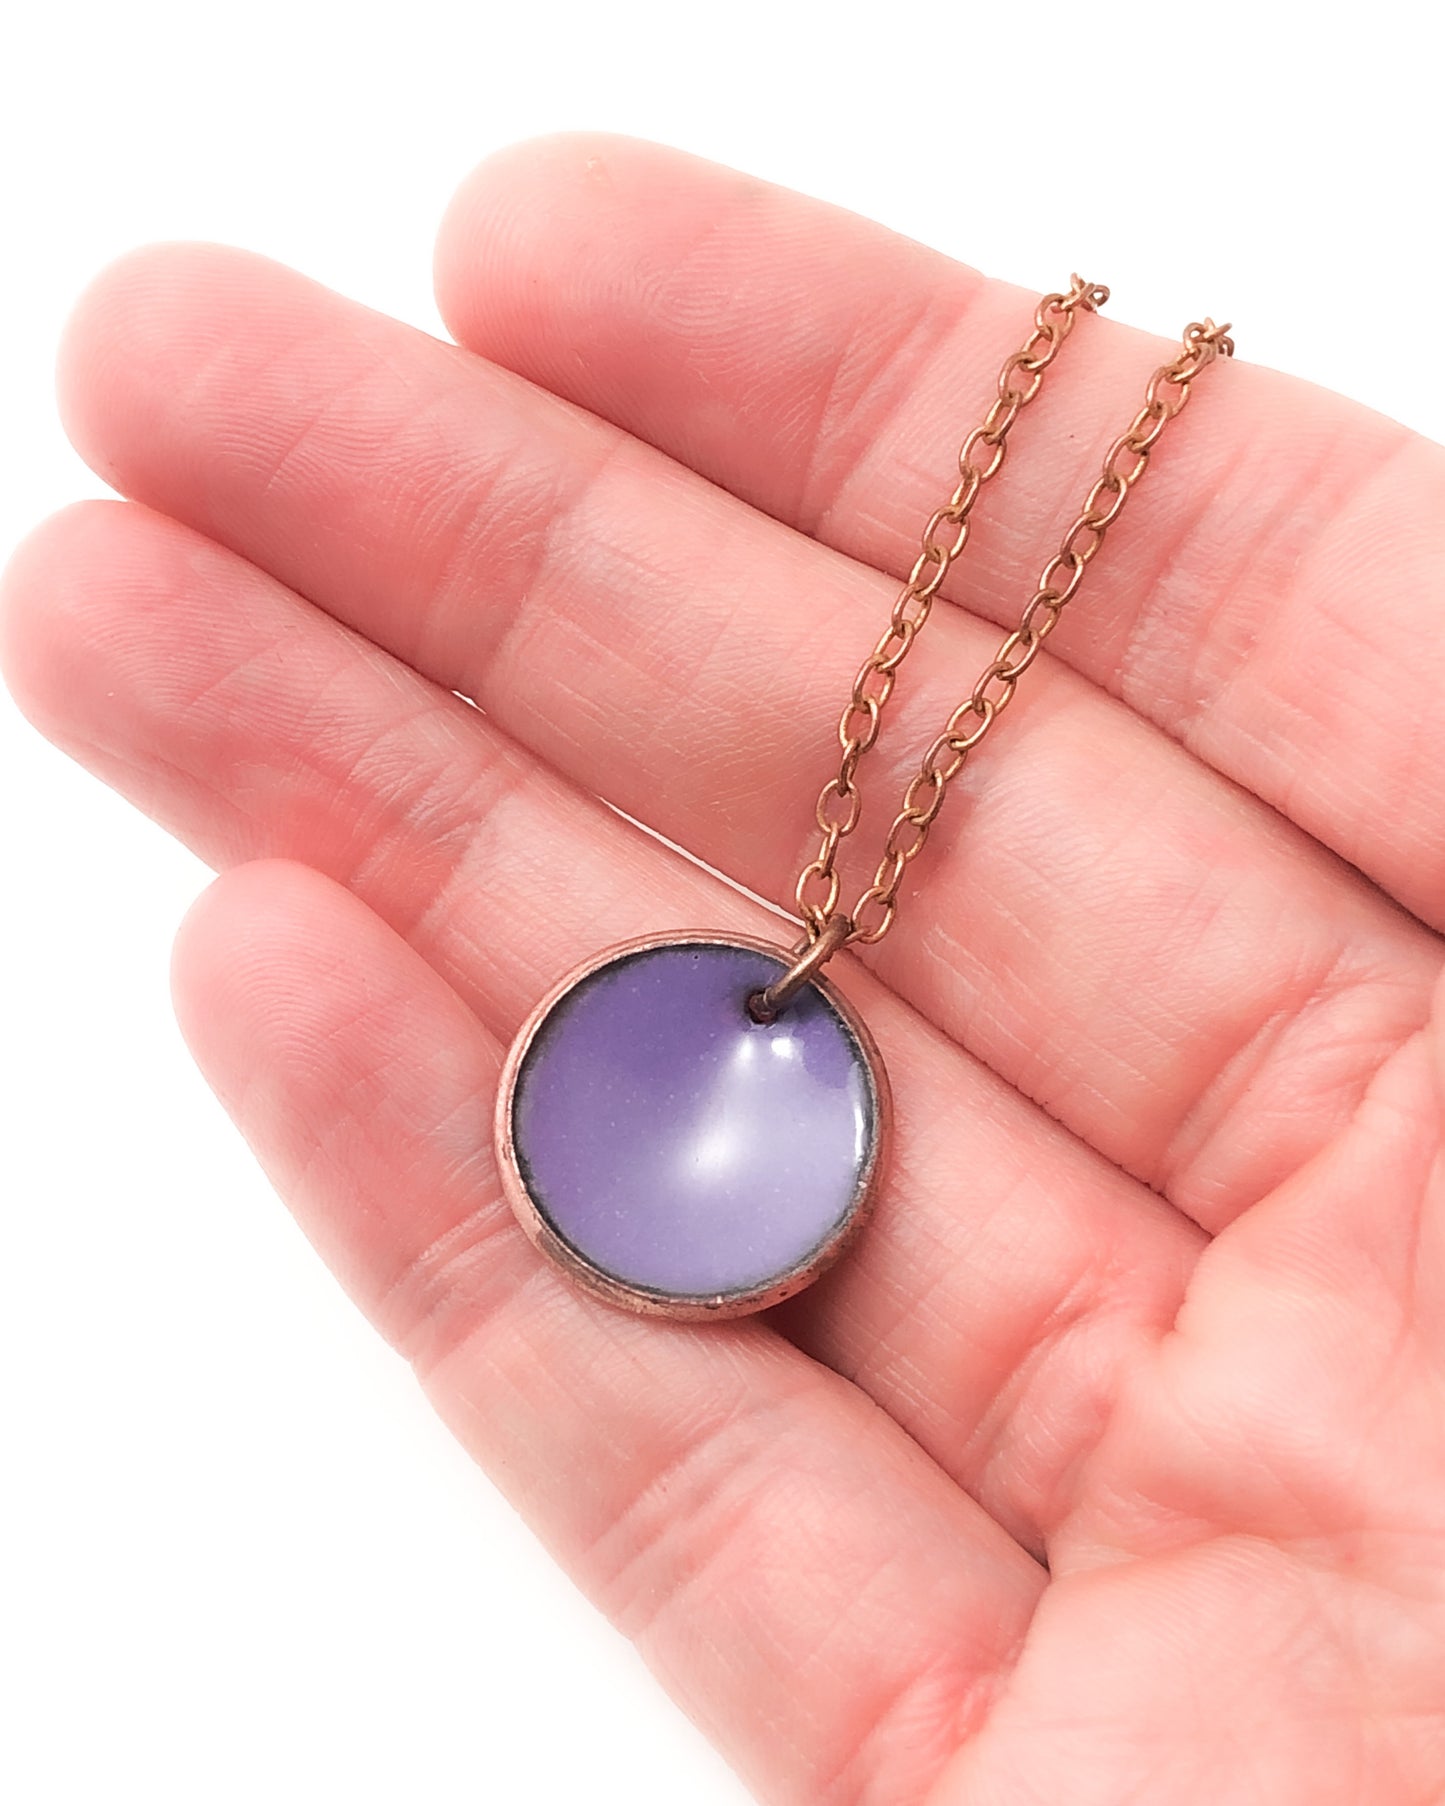 Wisteria Enameled penny pendant necklace [ready to ship]